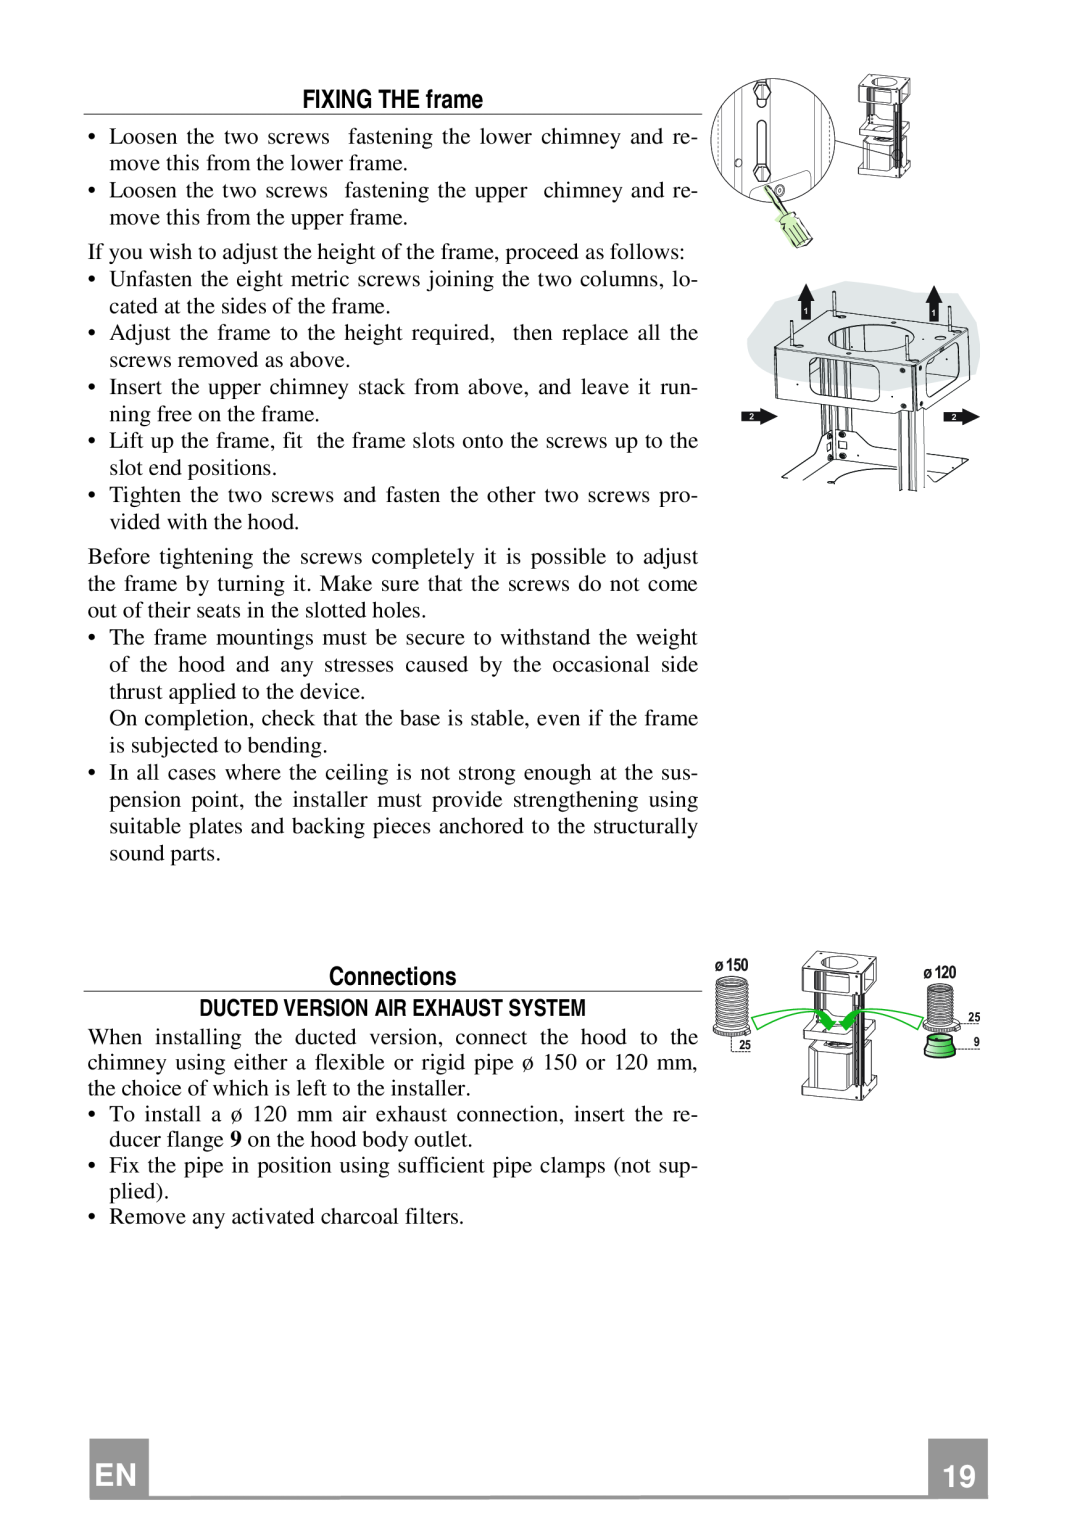 Franke Consumer Products FGC 906 I manual FIXING THE frame, Connections, Ducted Version Air Exhaust System 